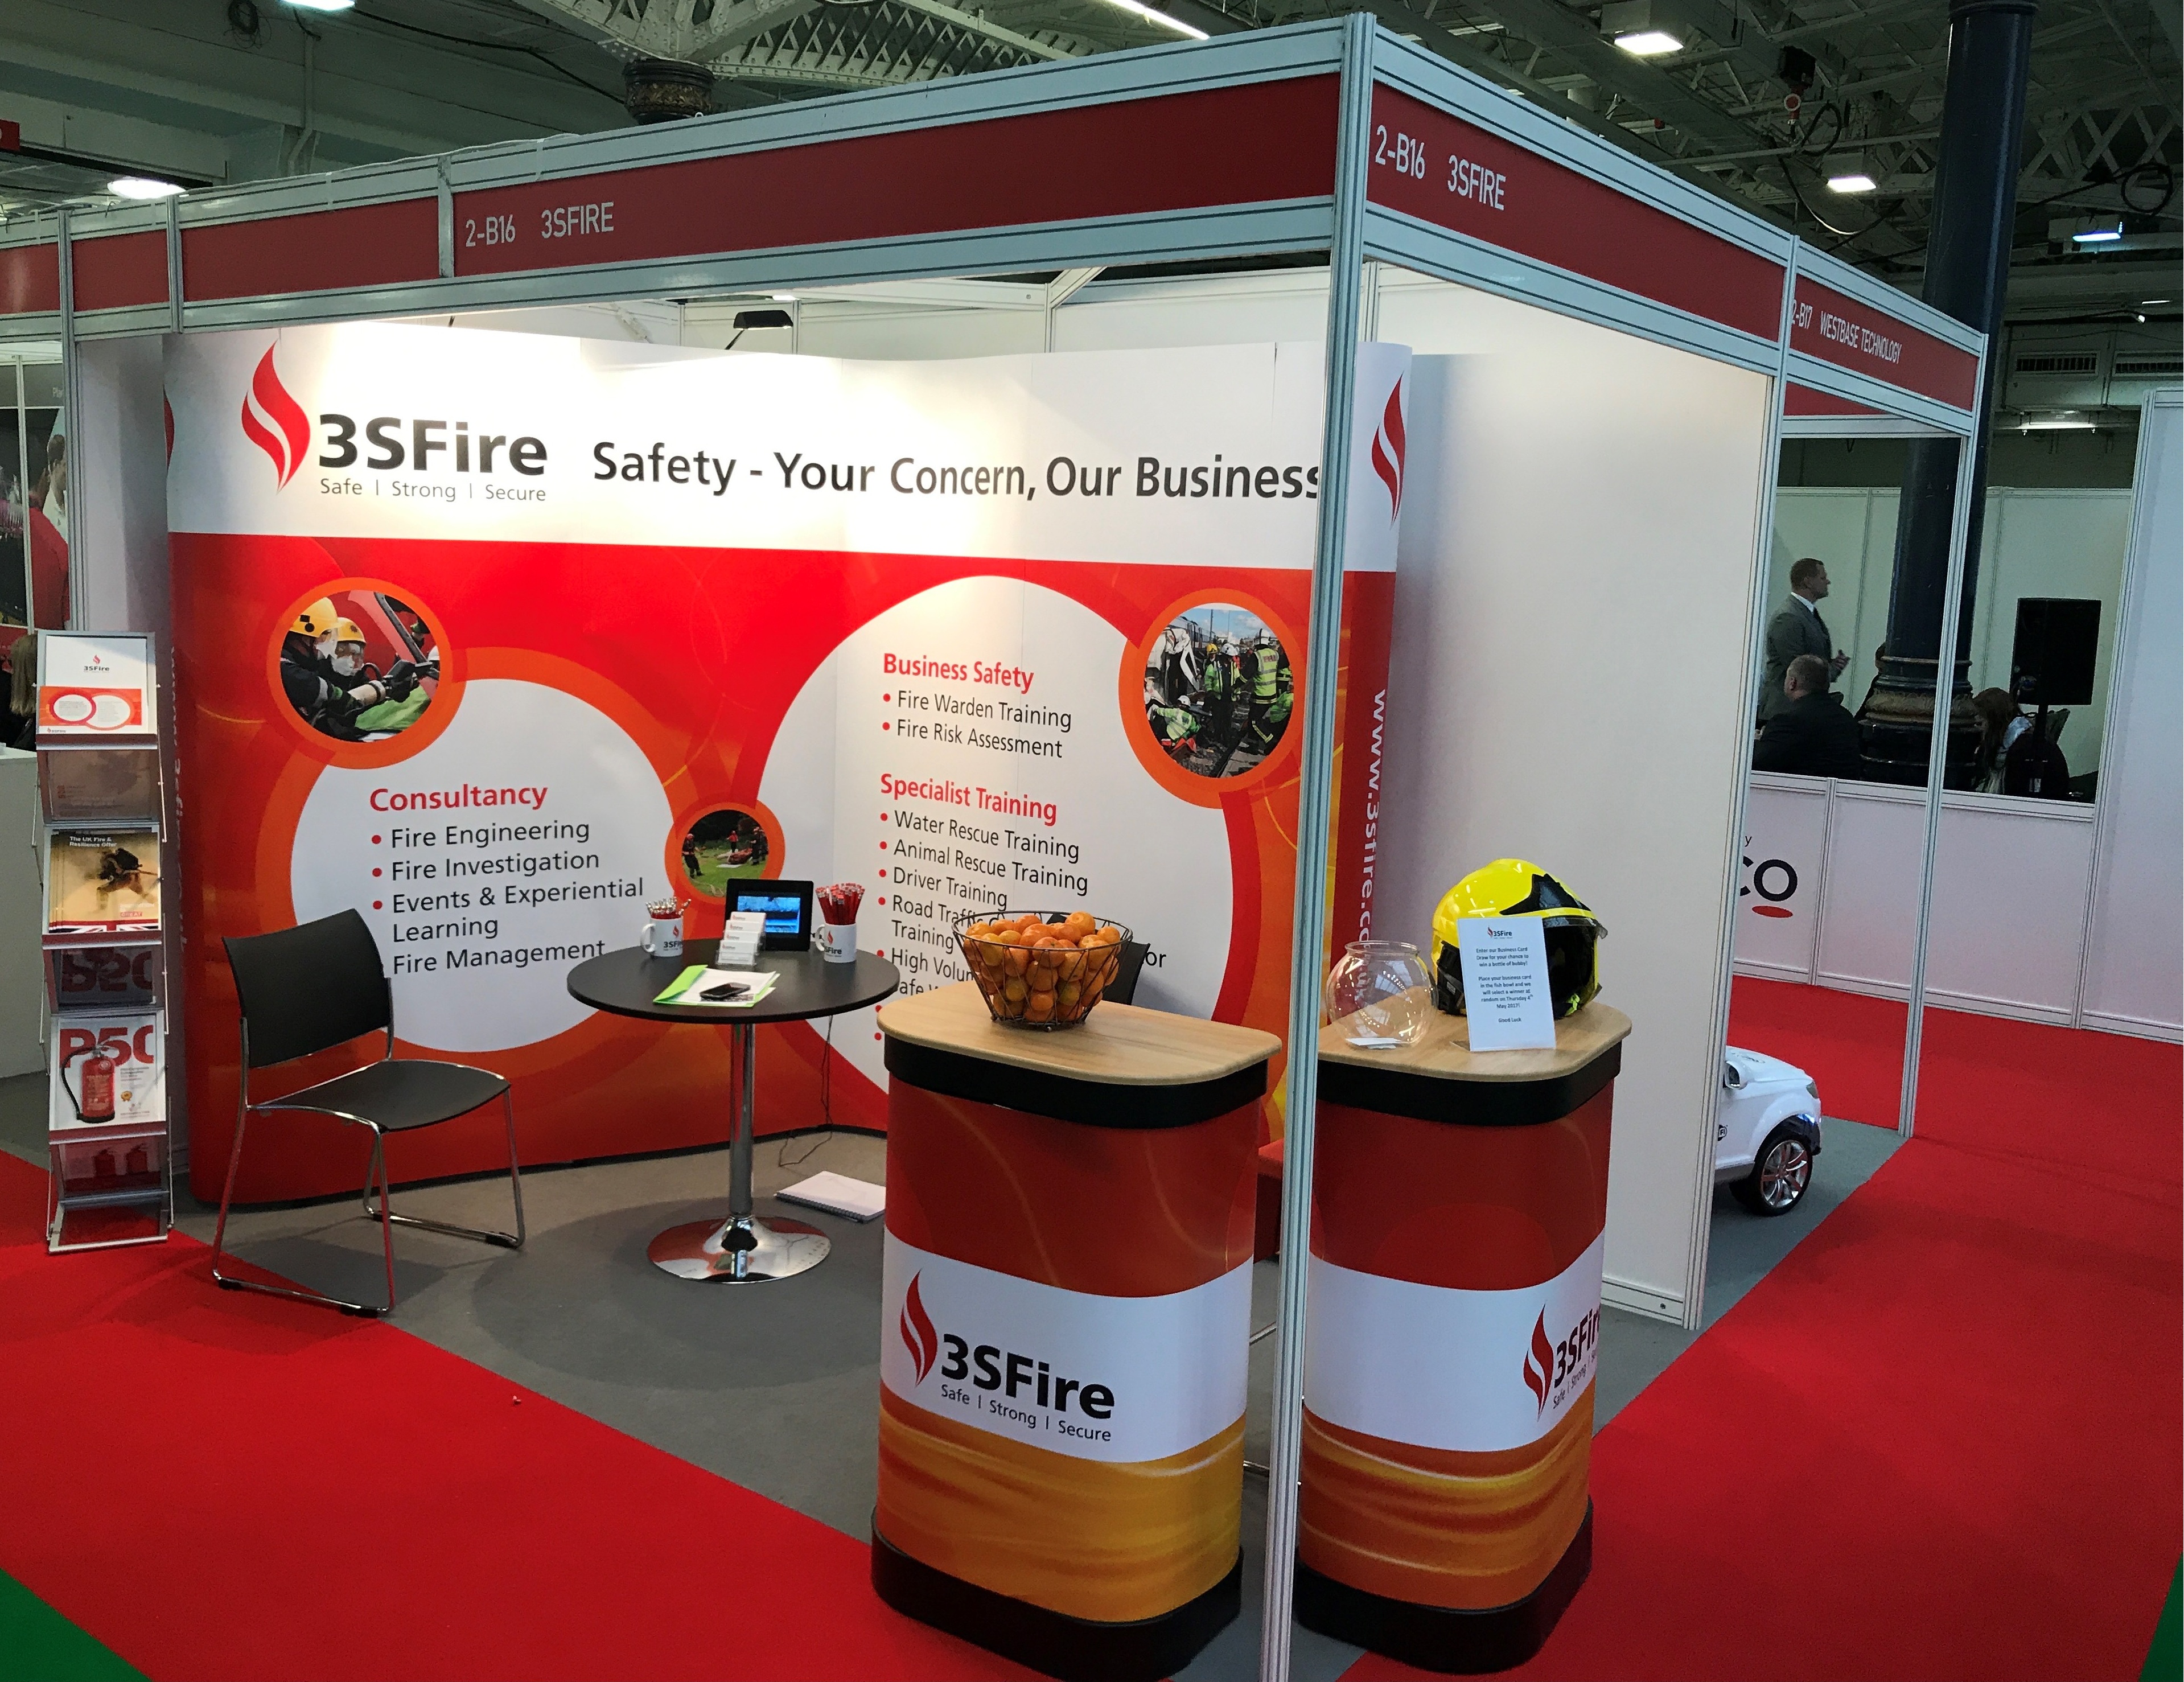 3SFire Exhibition stand